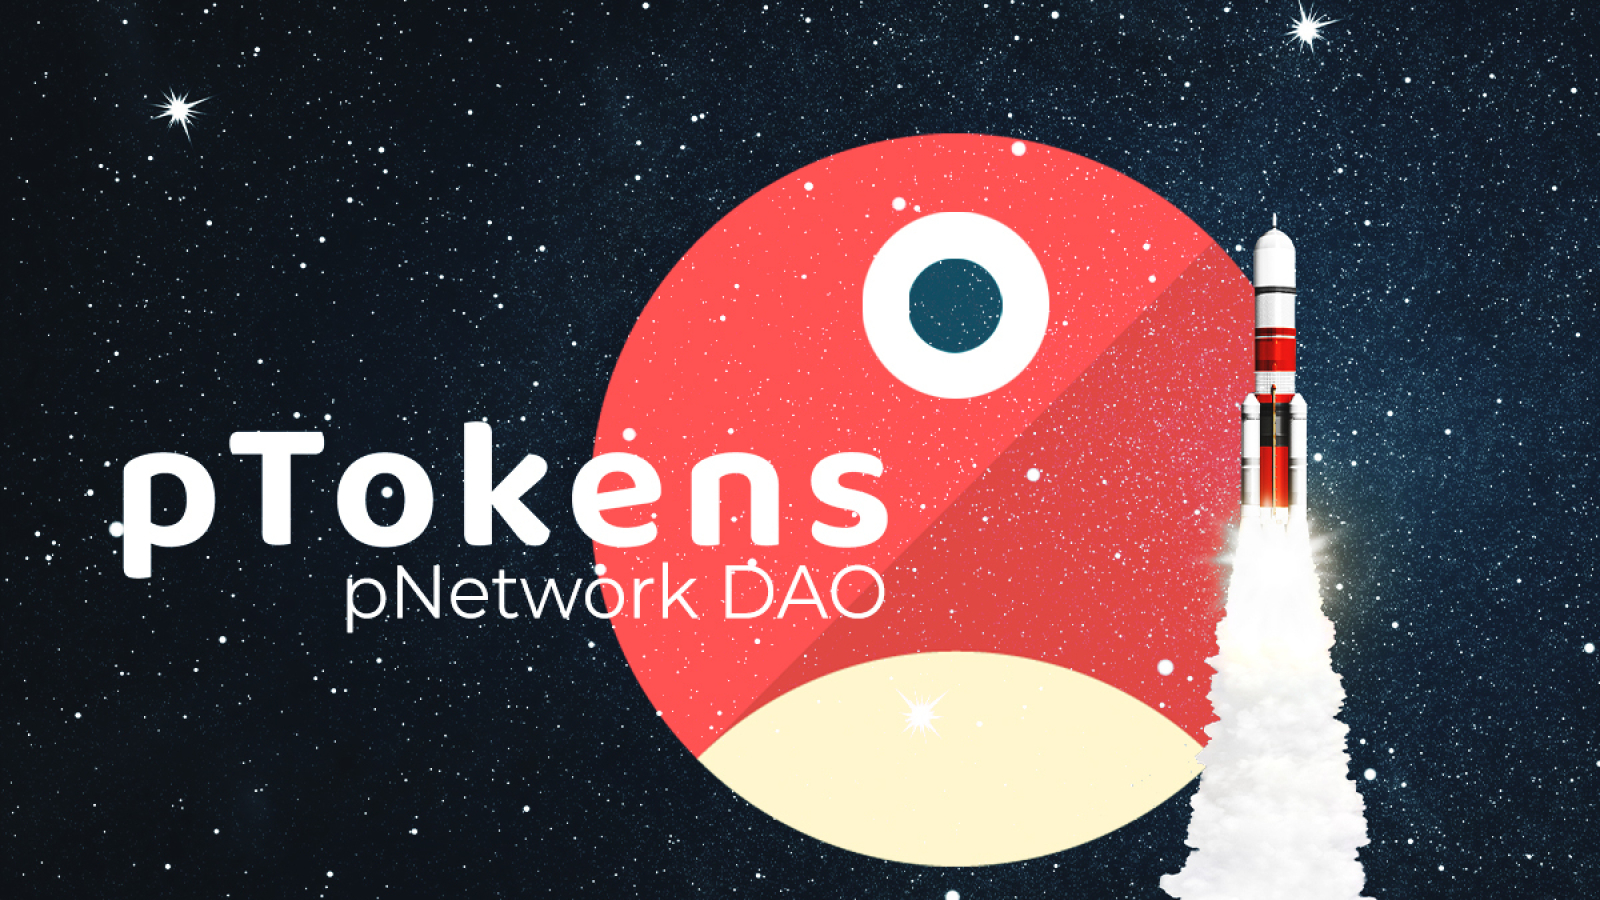 pTokens project launches pNetwork DAO with staking rewards of 42% APR interest